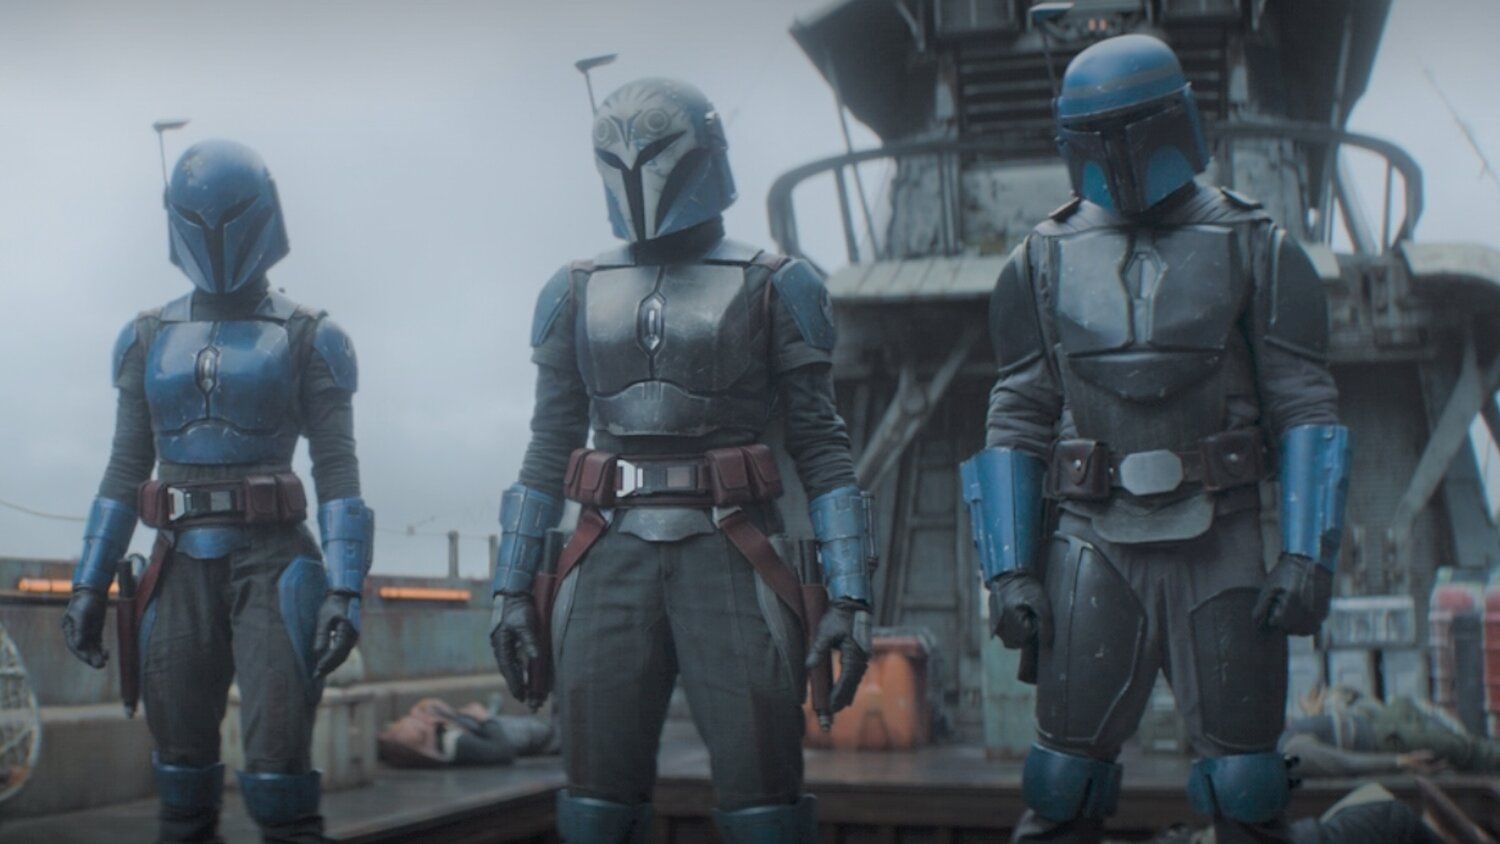 Let's Talk About THE MANDALORIAN Chapter 11: The Heiress Which Features Bo -Katan in Action!